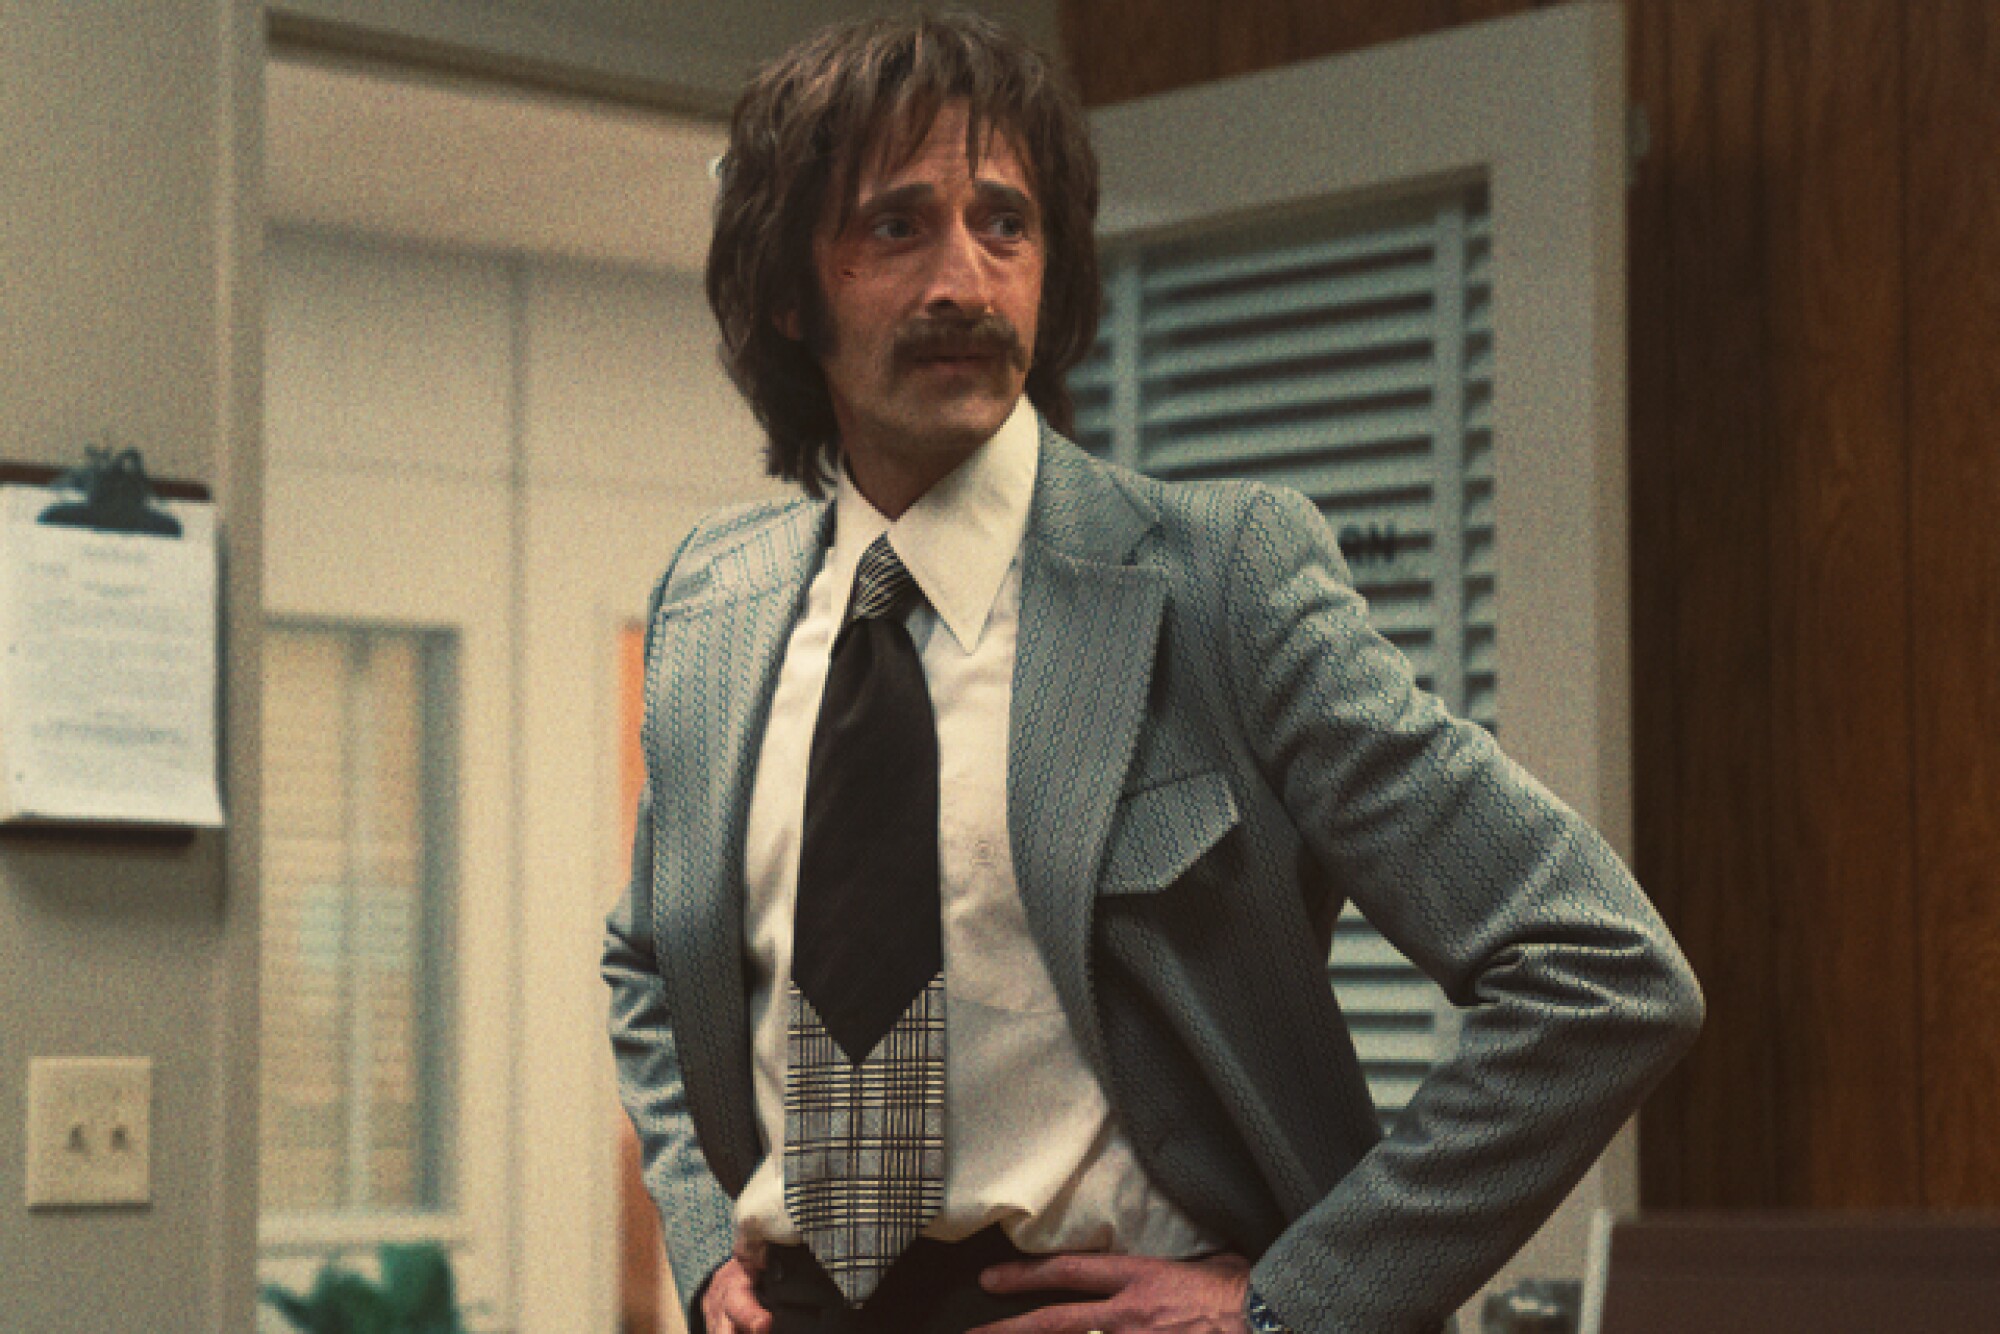 A man with shaggy hair and mustache wearing a suit with his hands on his waist